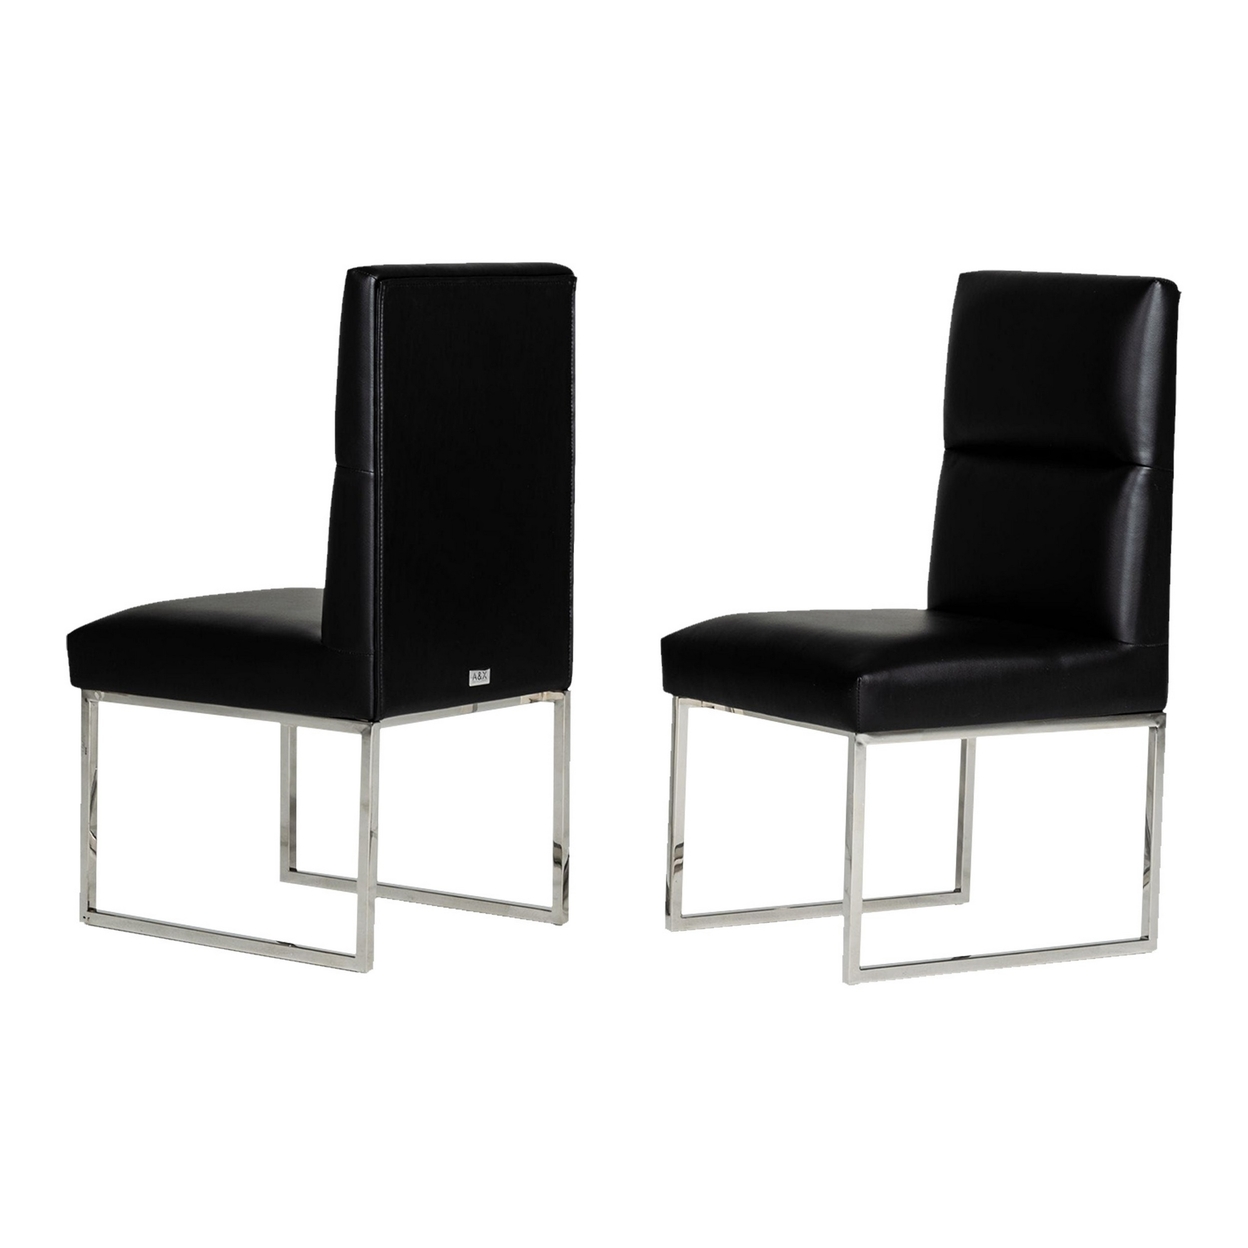 Hart 19 Inch Dining Chair, Set Of 2, Black Faux Leather, Parson Cantilever- Saltoro Sherpi